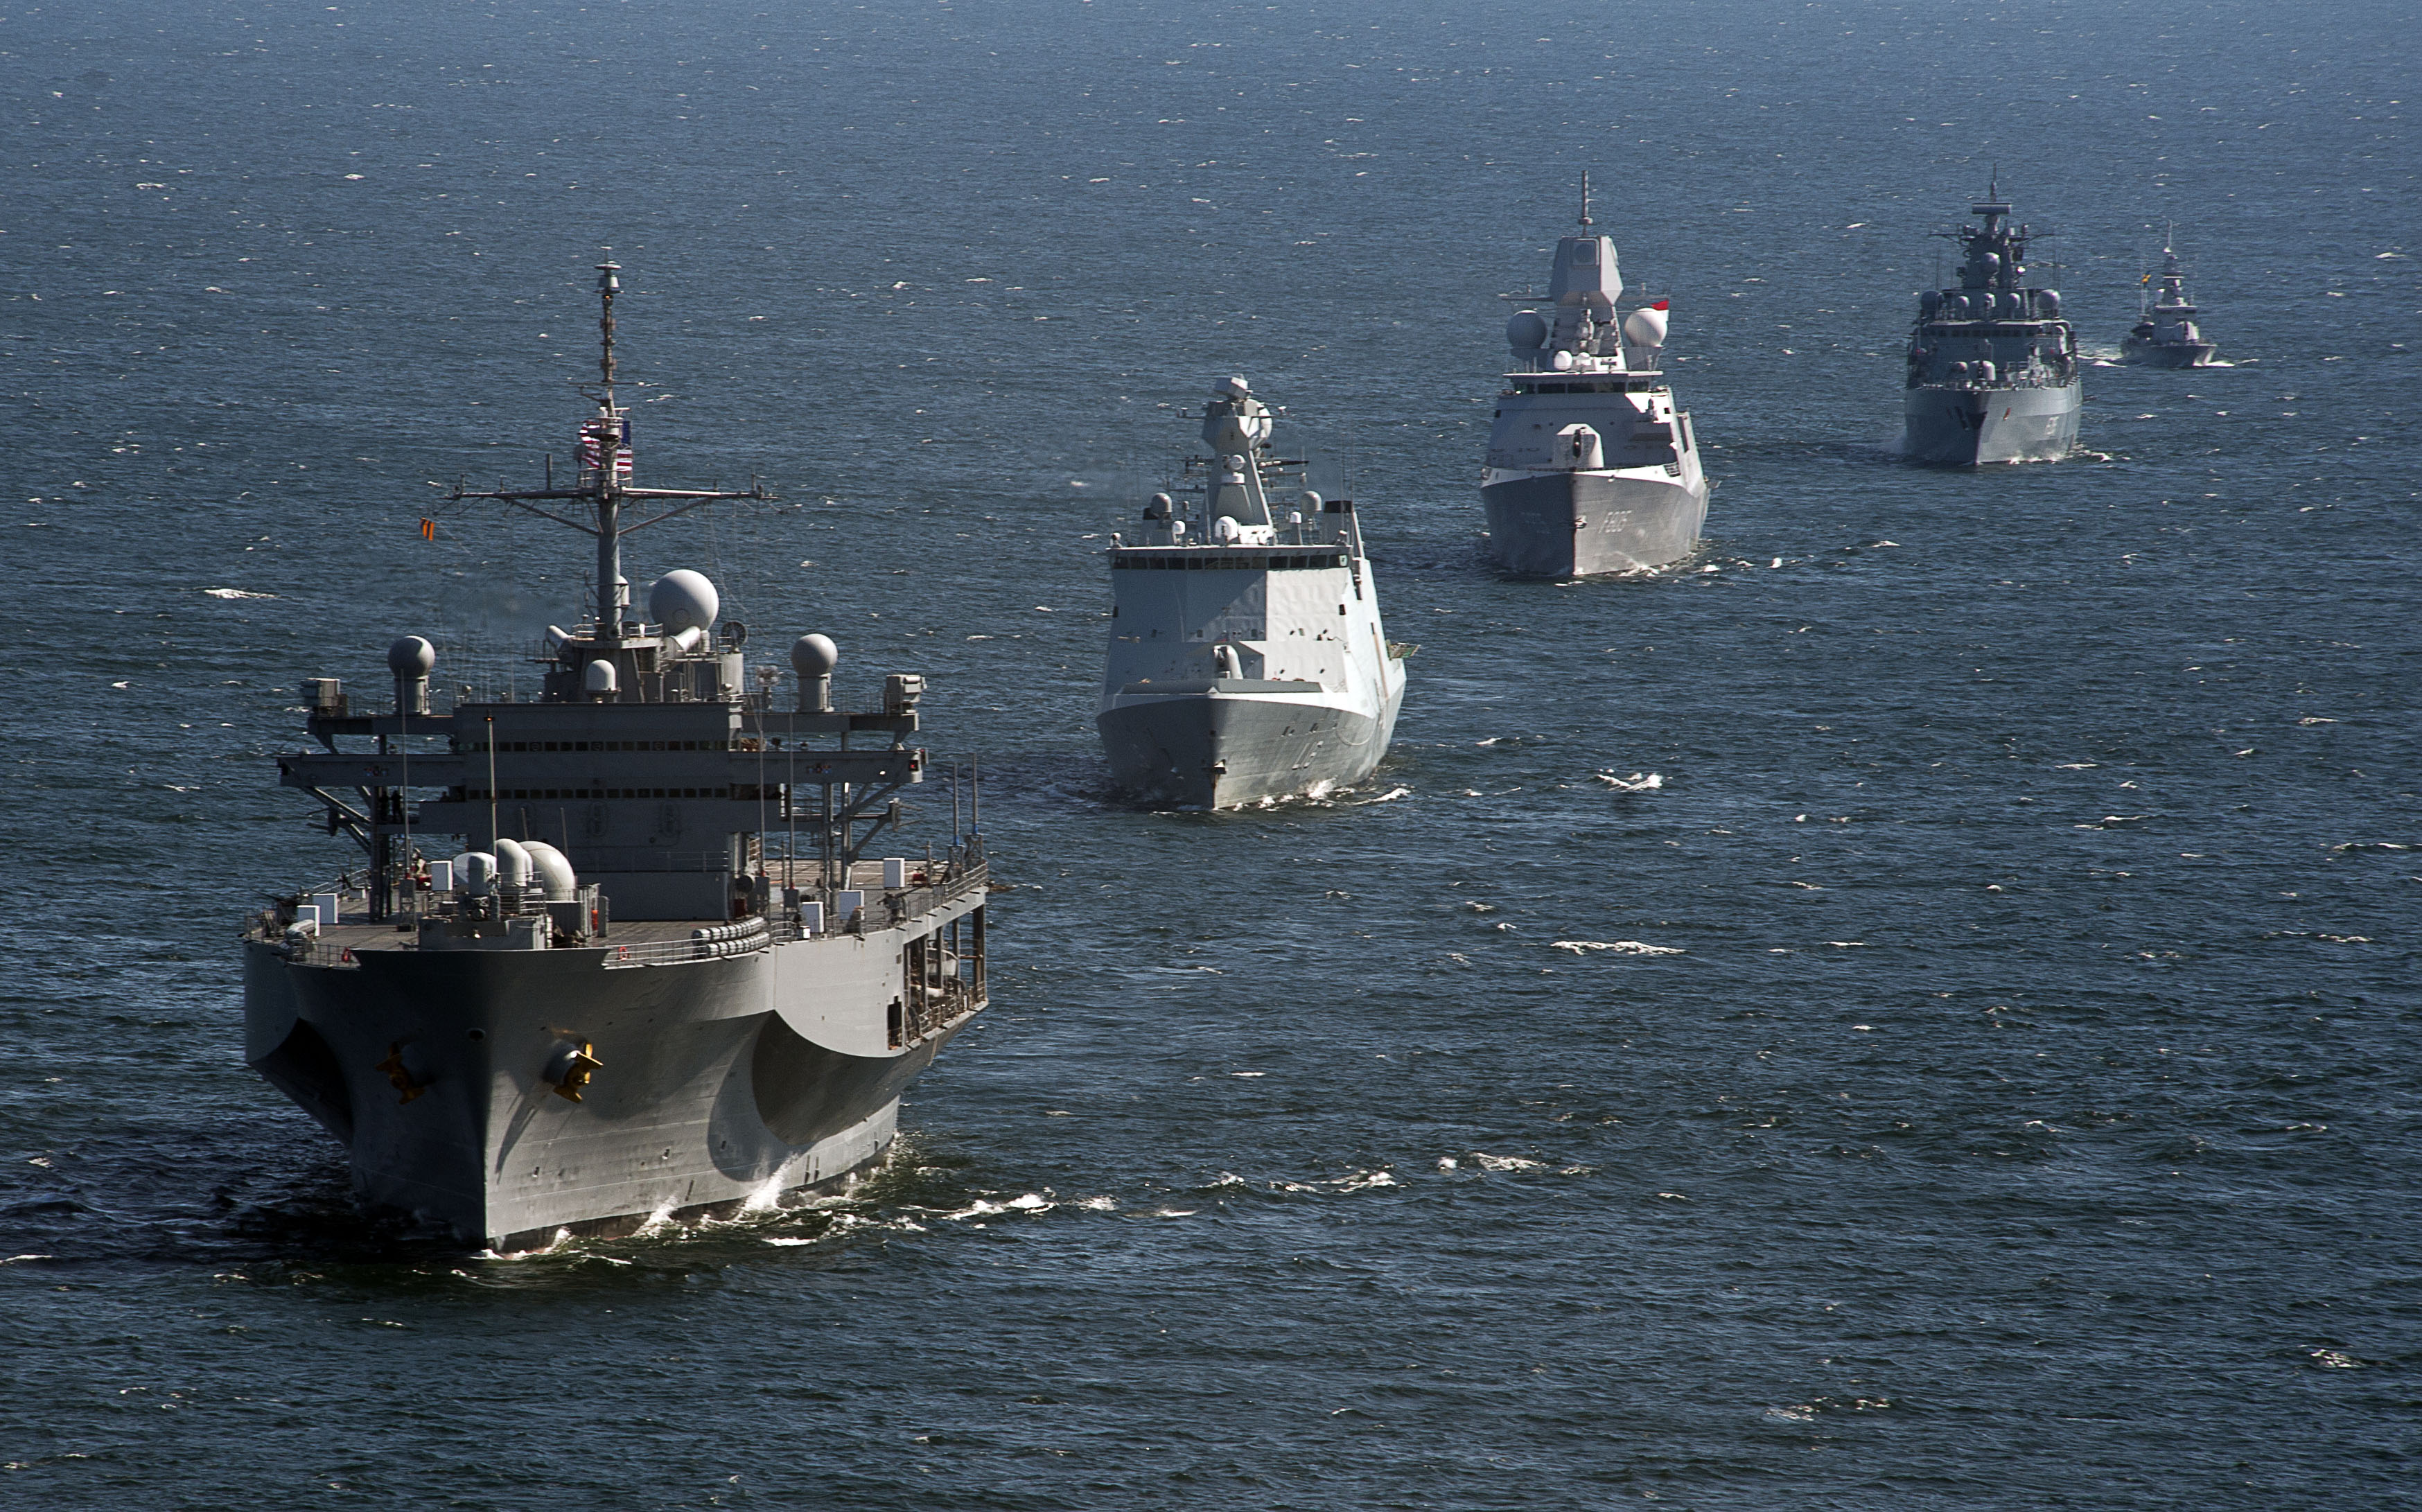 The_amphibious_command_ship_USS_Mount_Whitney_%28LCC_20%29%2C_foreground%2C_leads_a_formation_of_foreign_naval_vessels_June_16%2C_2013%2C_in_the_Baltic_Sea_during_Baltic_Operations_%28BALTOPS%29_2013_130616-N-ZL691-144.jpg